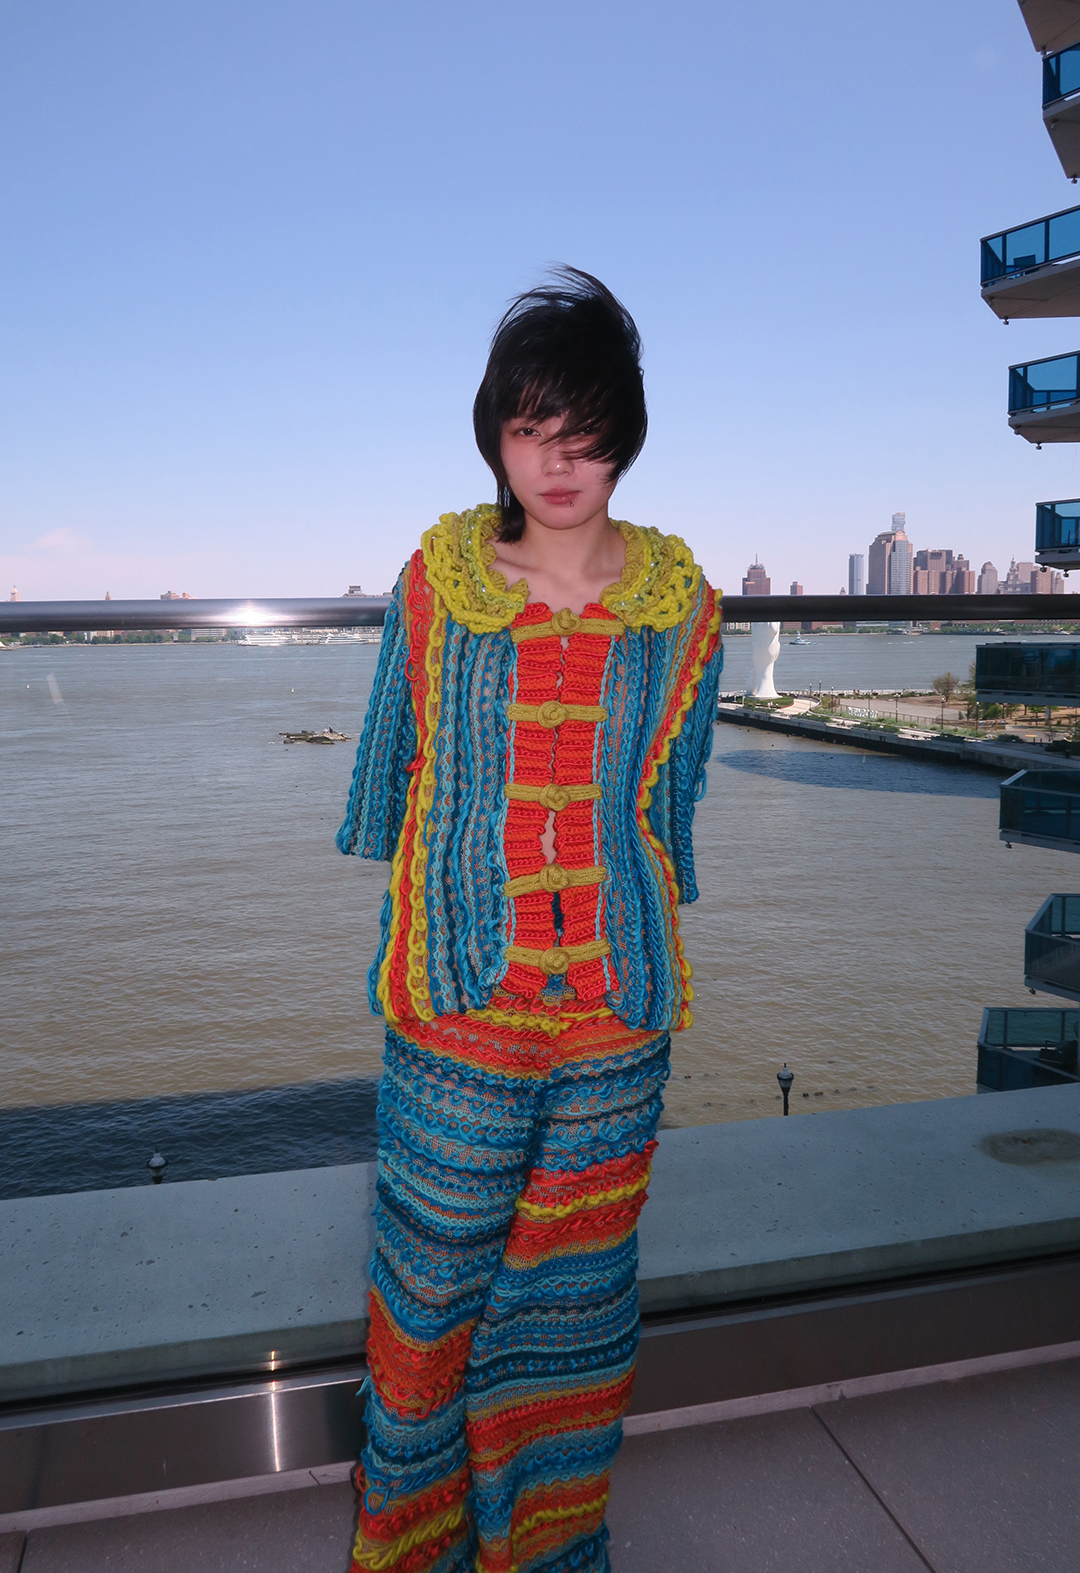 Front view of a model wearing a knit suit. The yarns alternate randomly between red, blue, and yellow. There is a river in the background.